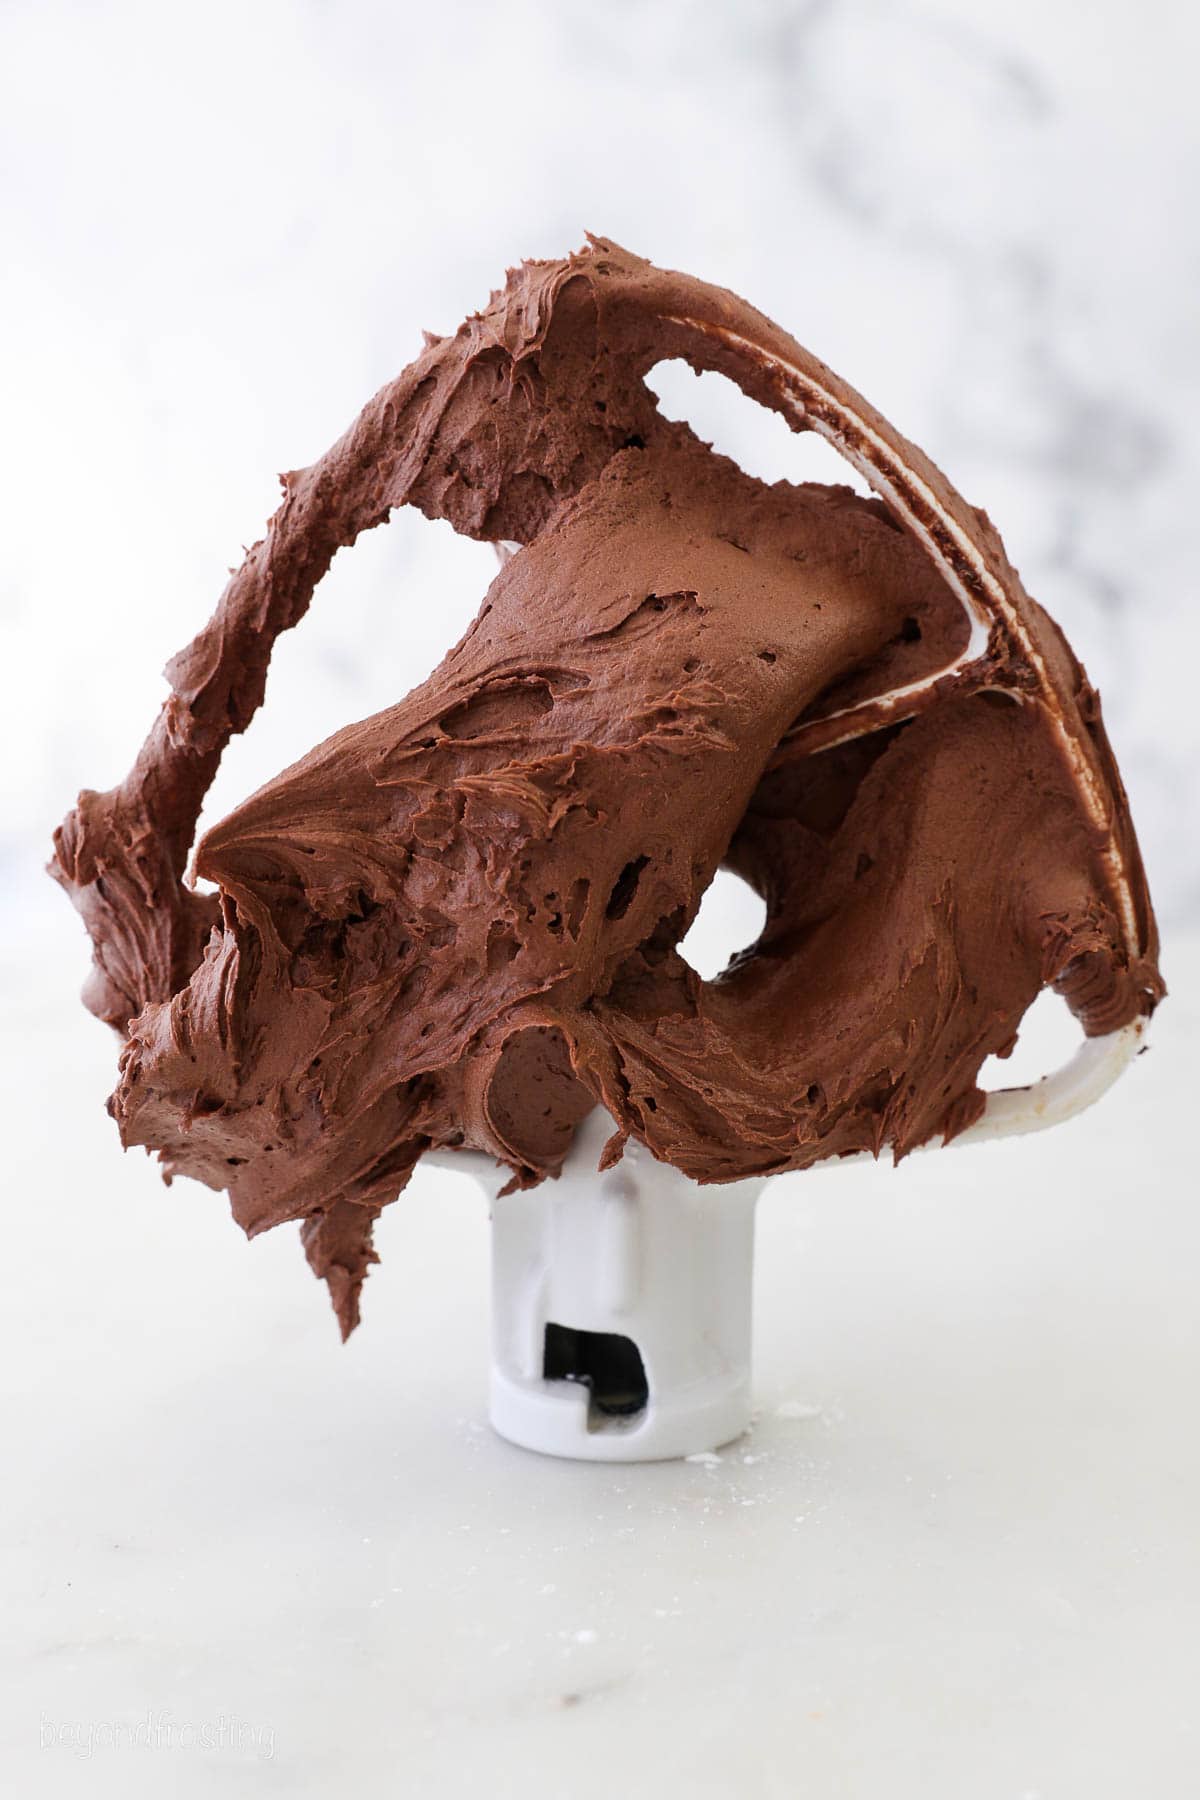 A stand mixer attachment propped upright on a countertop coated in thick chocolate cream cheese frosting.